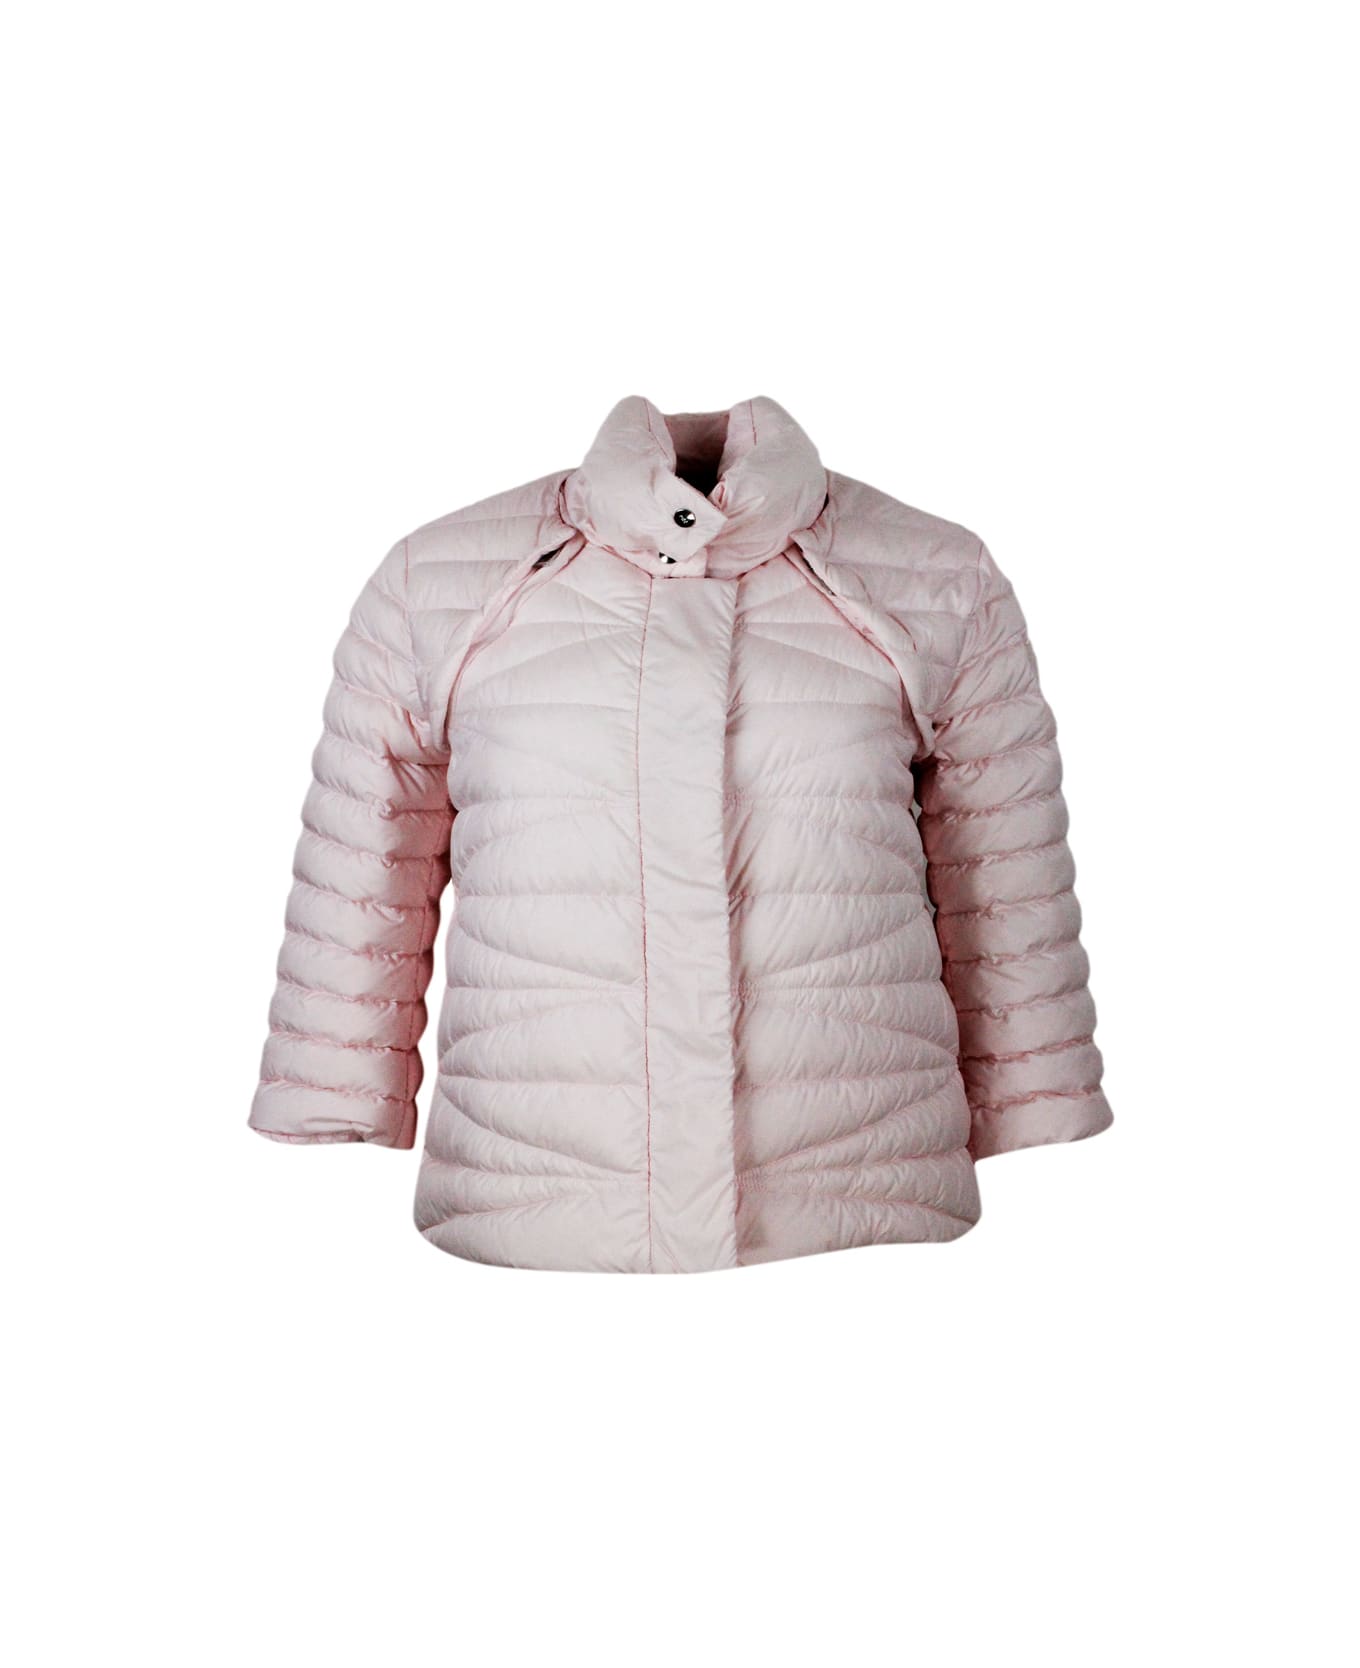 Add 100 Gram Down Jacket With High Quality Feathers. The Sleeves Are Detachable With A Convenient Zip. Side Pockets And Zip And Button Closure - Pink